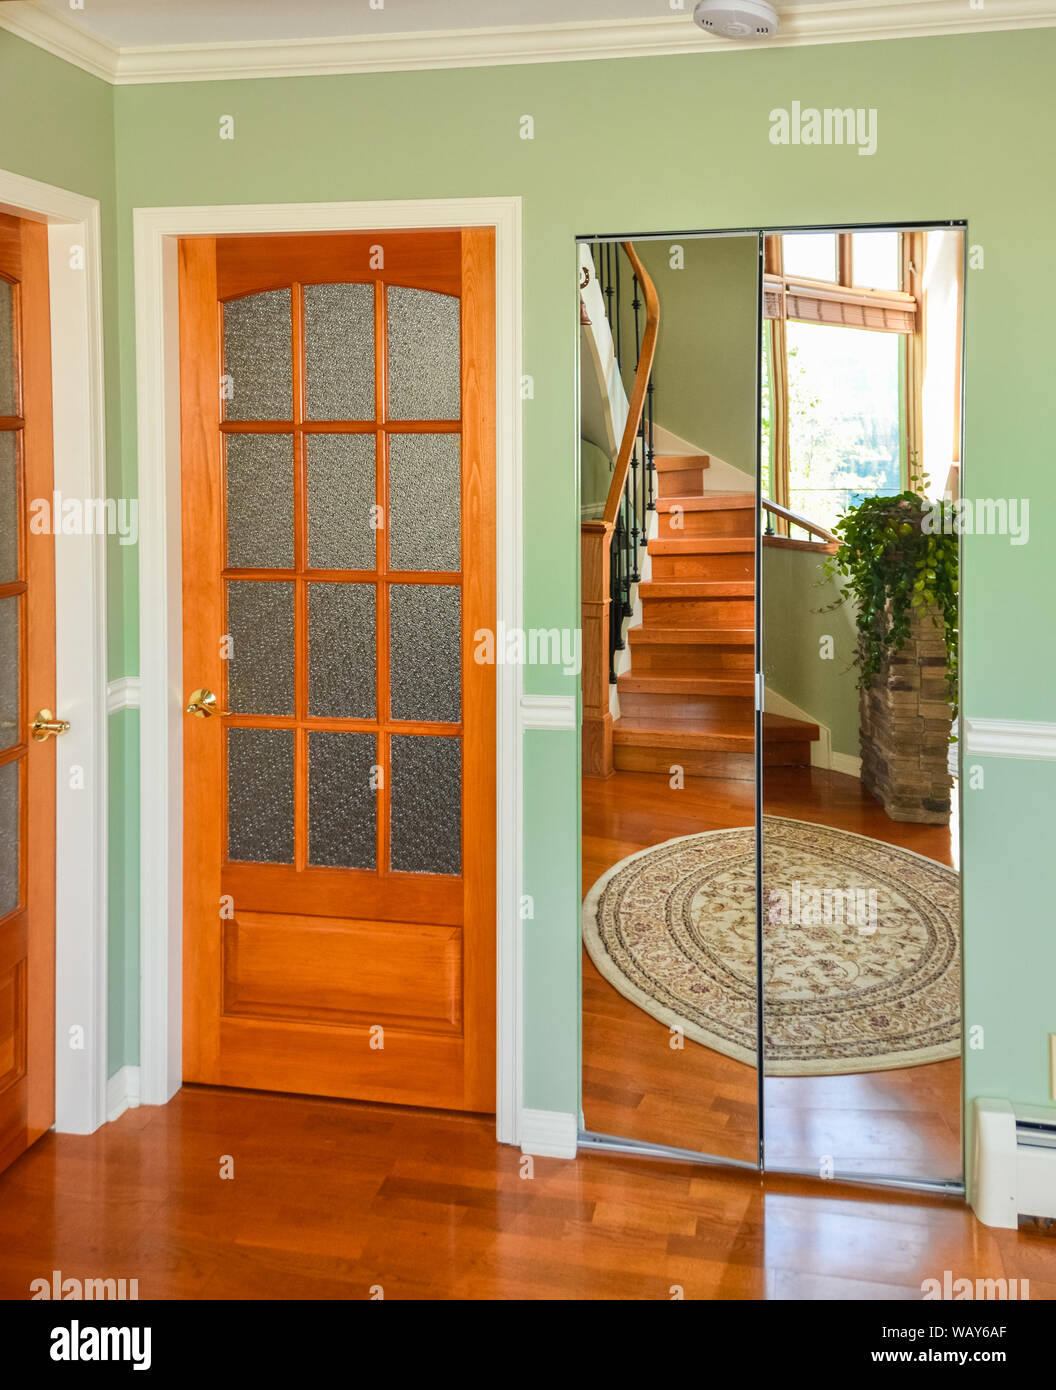 Wooden french doors. Interior design of luxury residential house Stock  Photo - Alamy